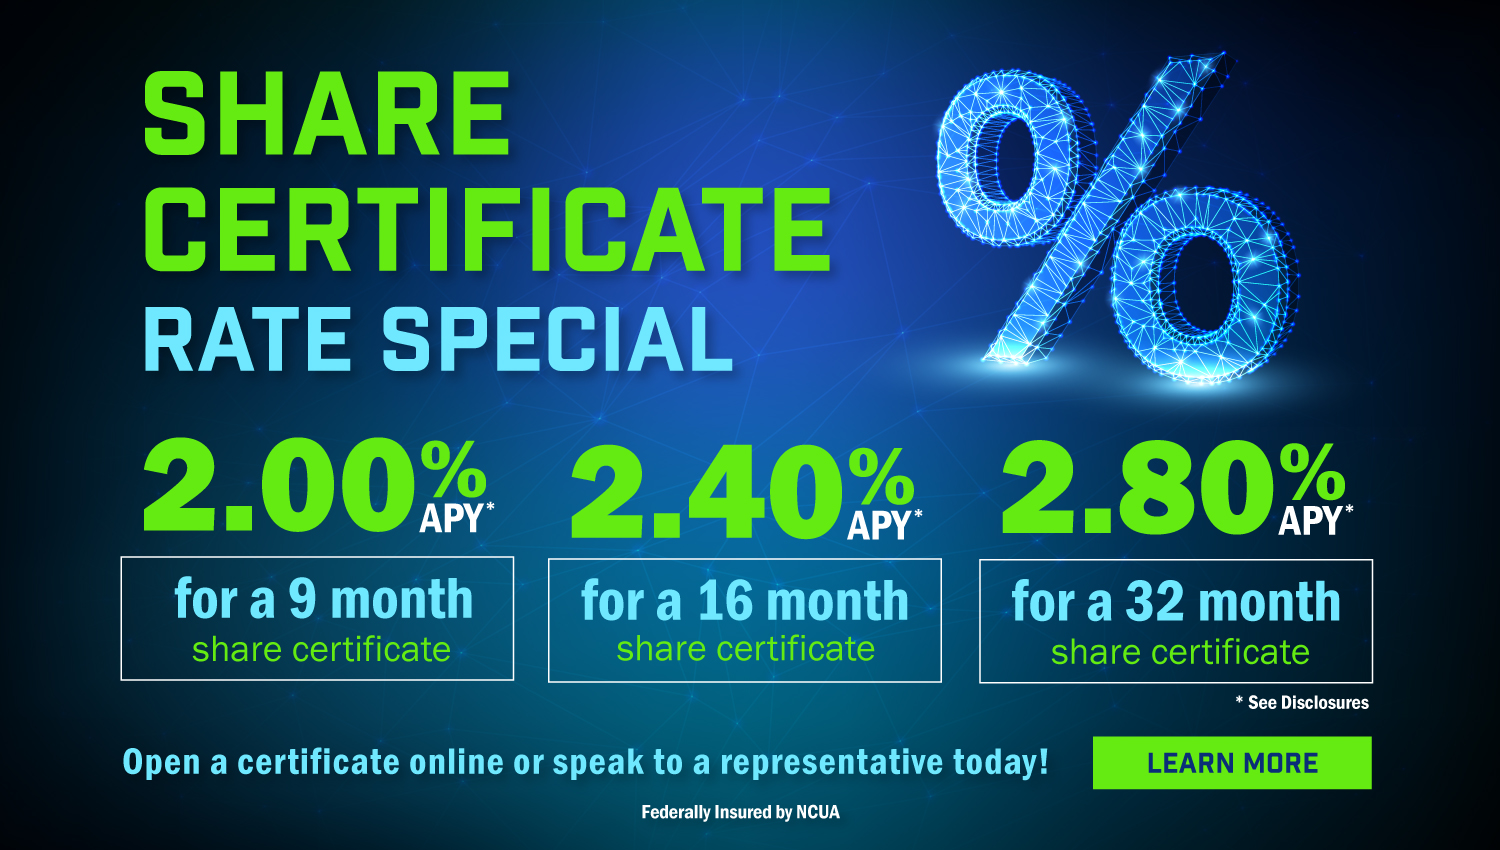 Share Certificate Rate Special